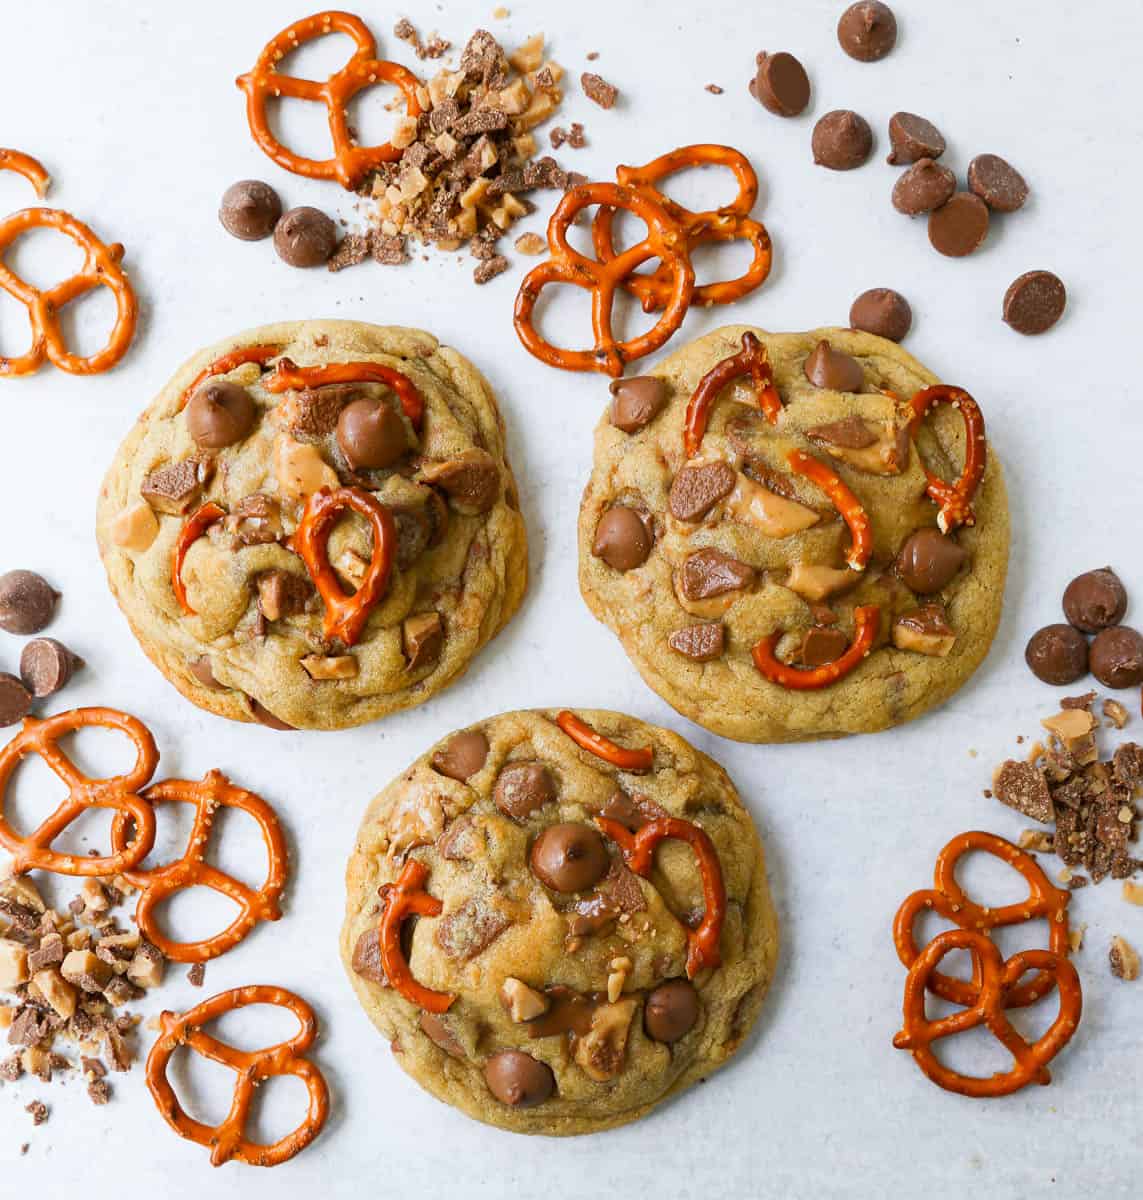 Three thick and chewy chocolate toffee pretzel cookies made with crushed pretzels, chopped toffee, and milk chocolate chips.